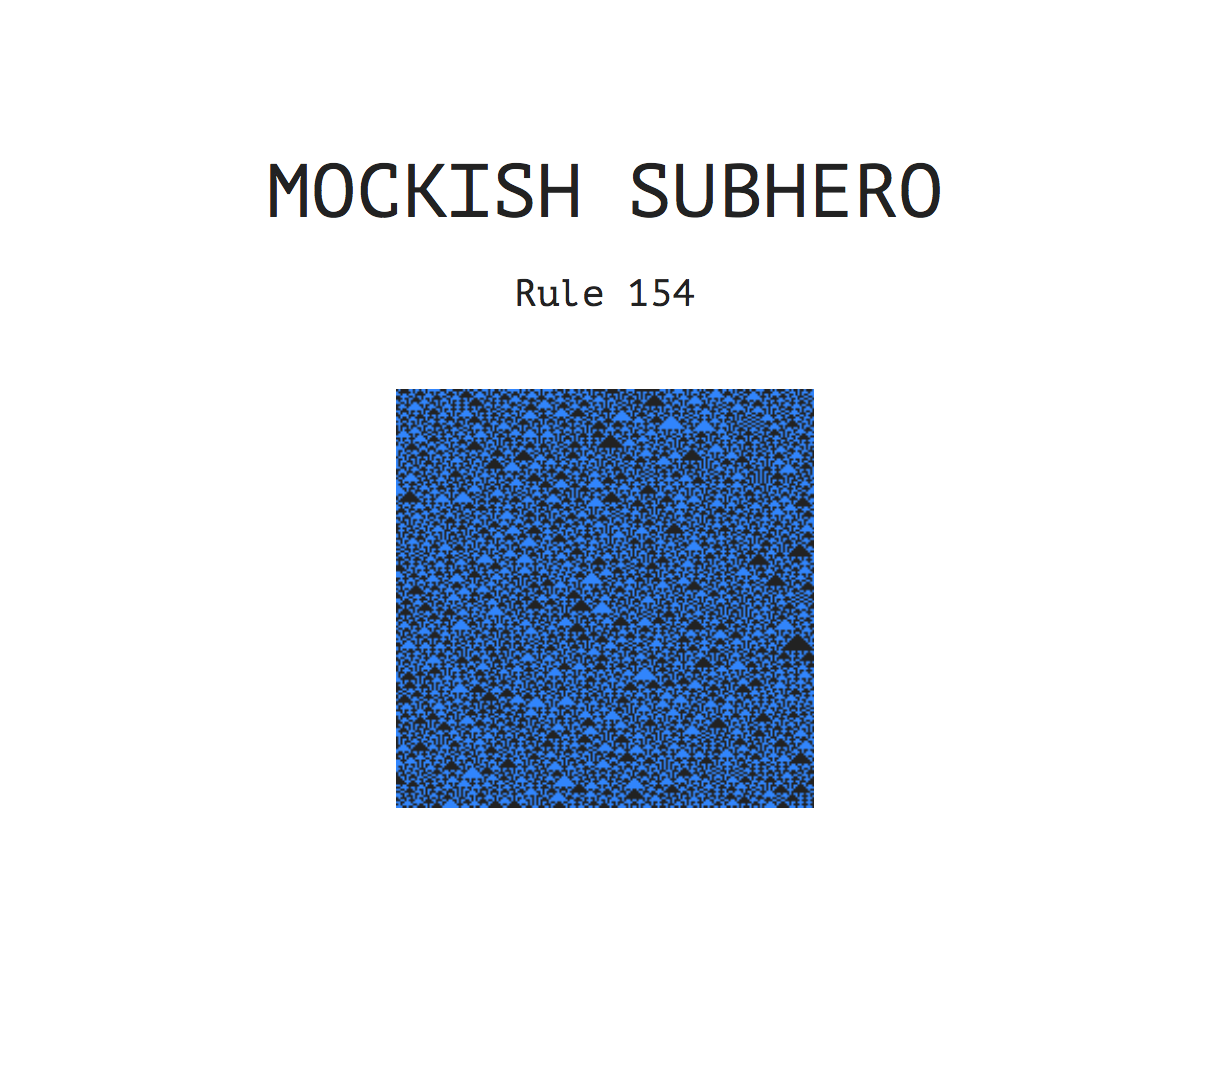 Title page from a generated book: MOCKISH/SUBHERO